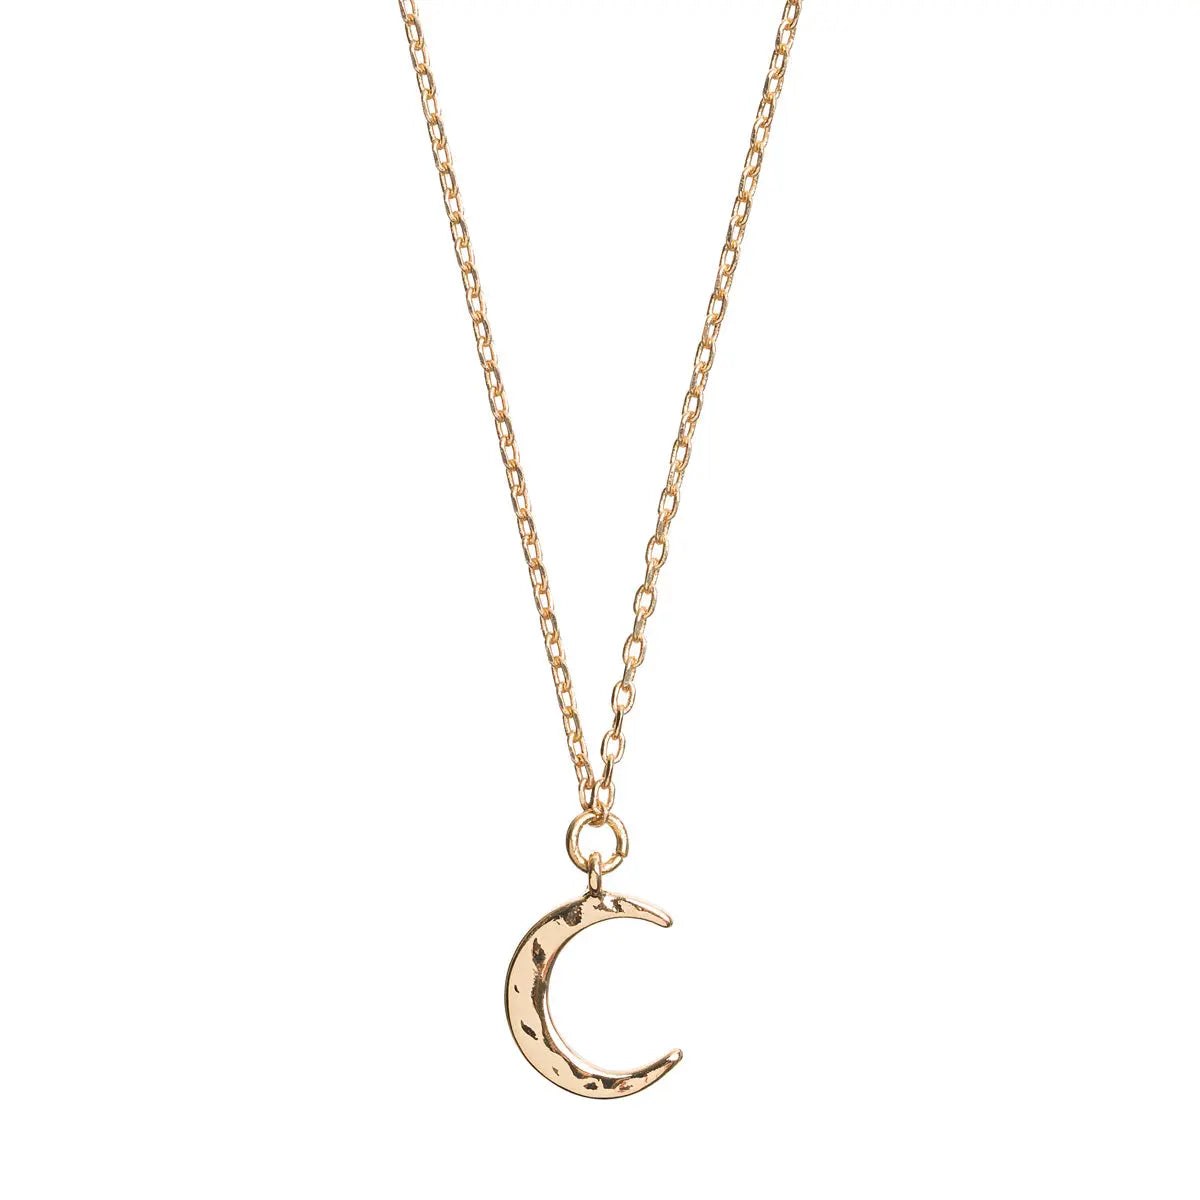 Hammered moon necklace Gold